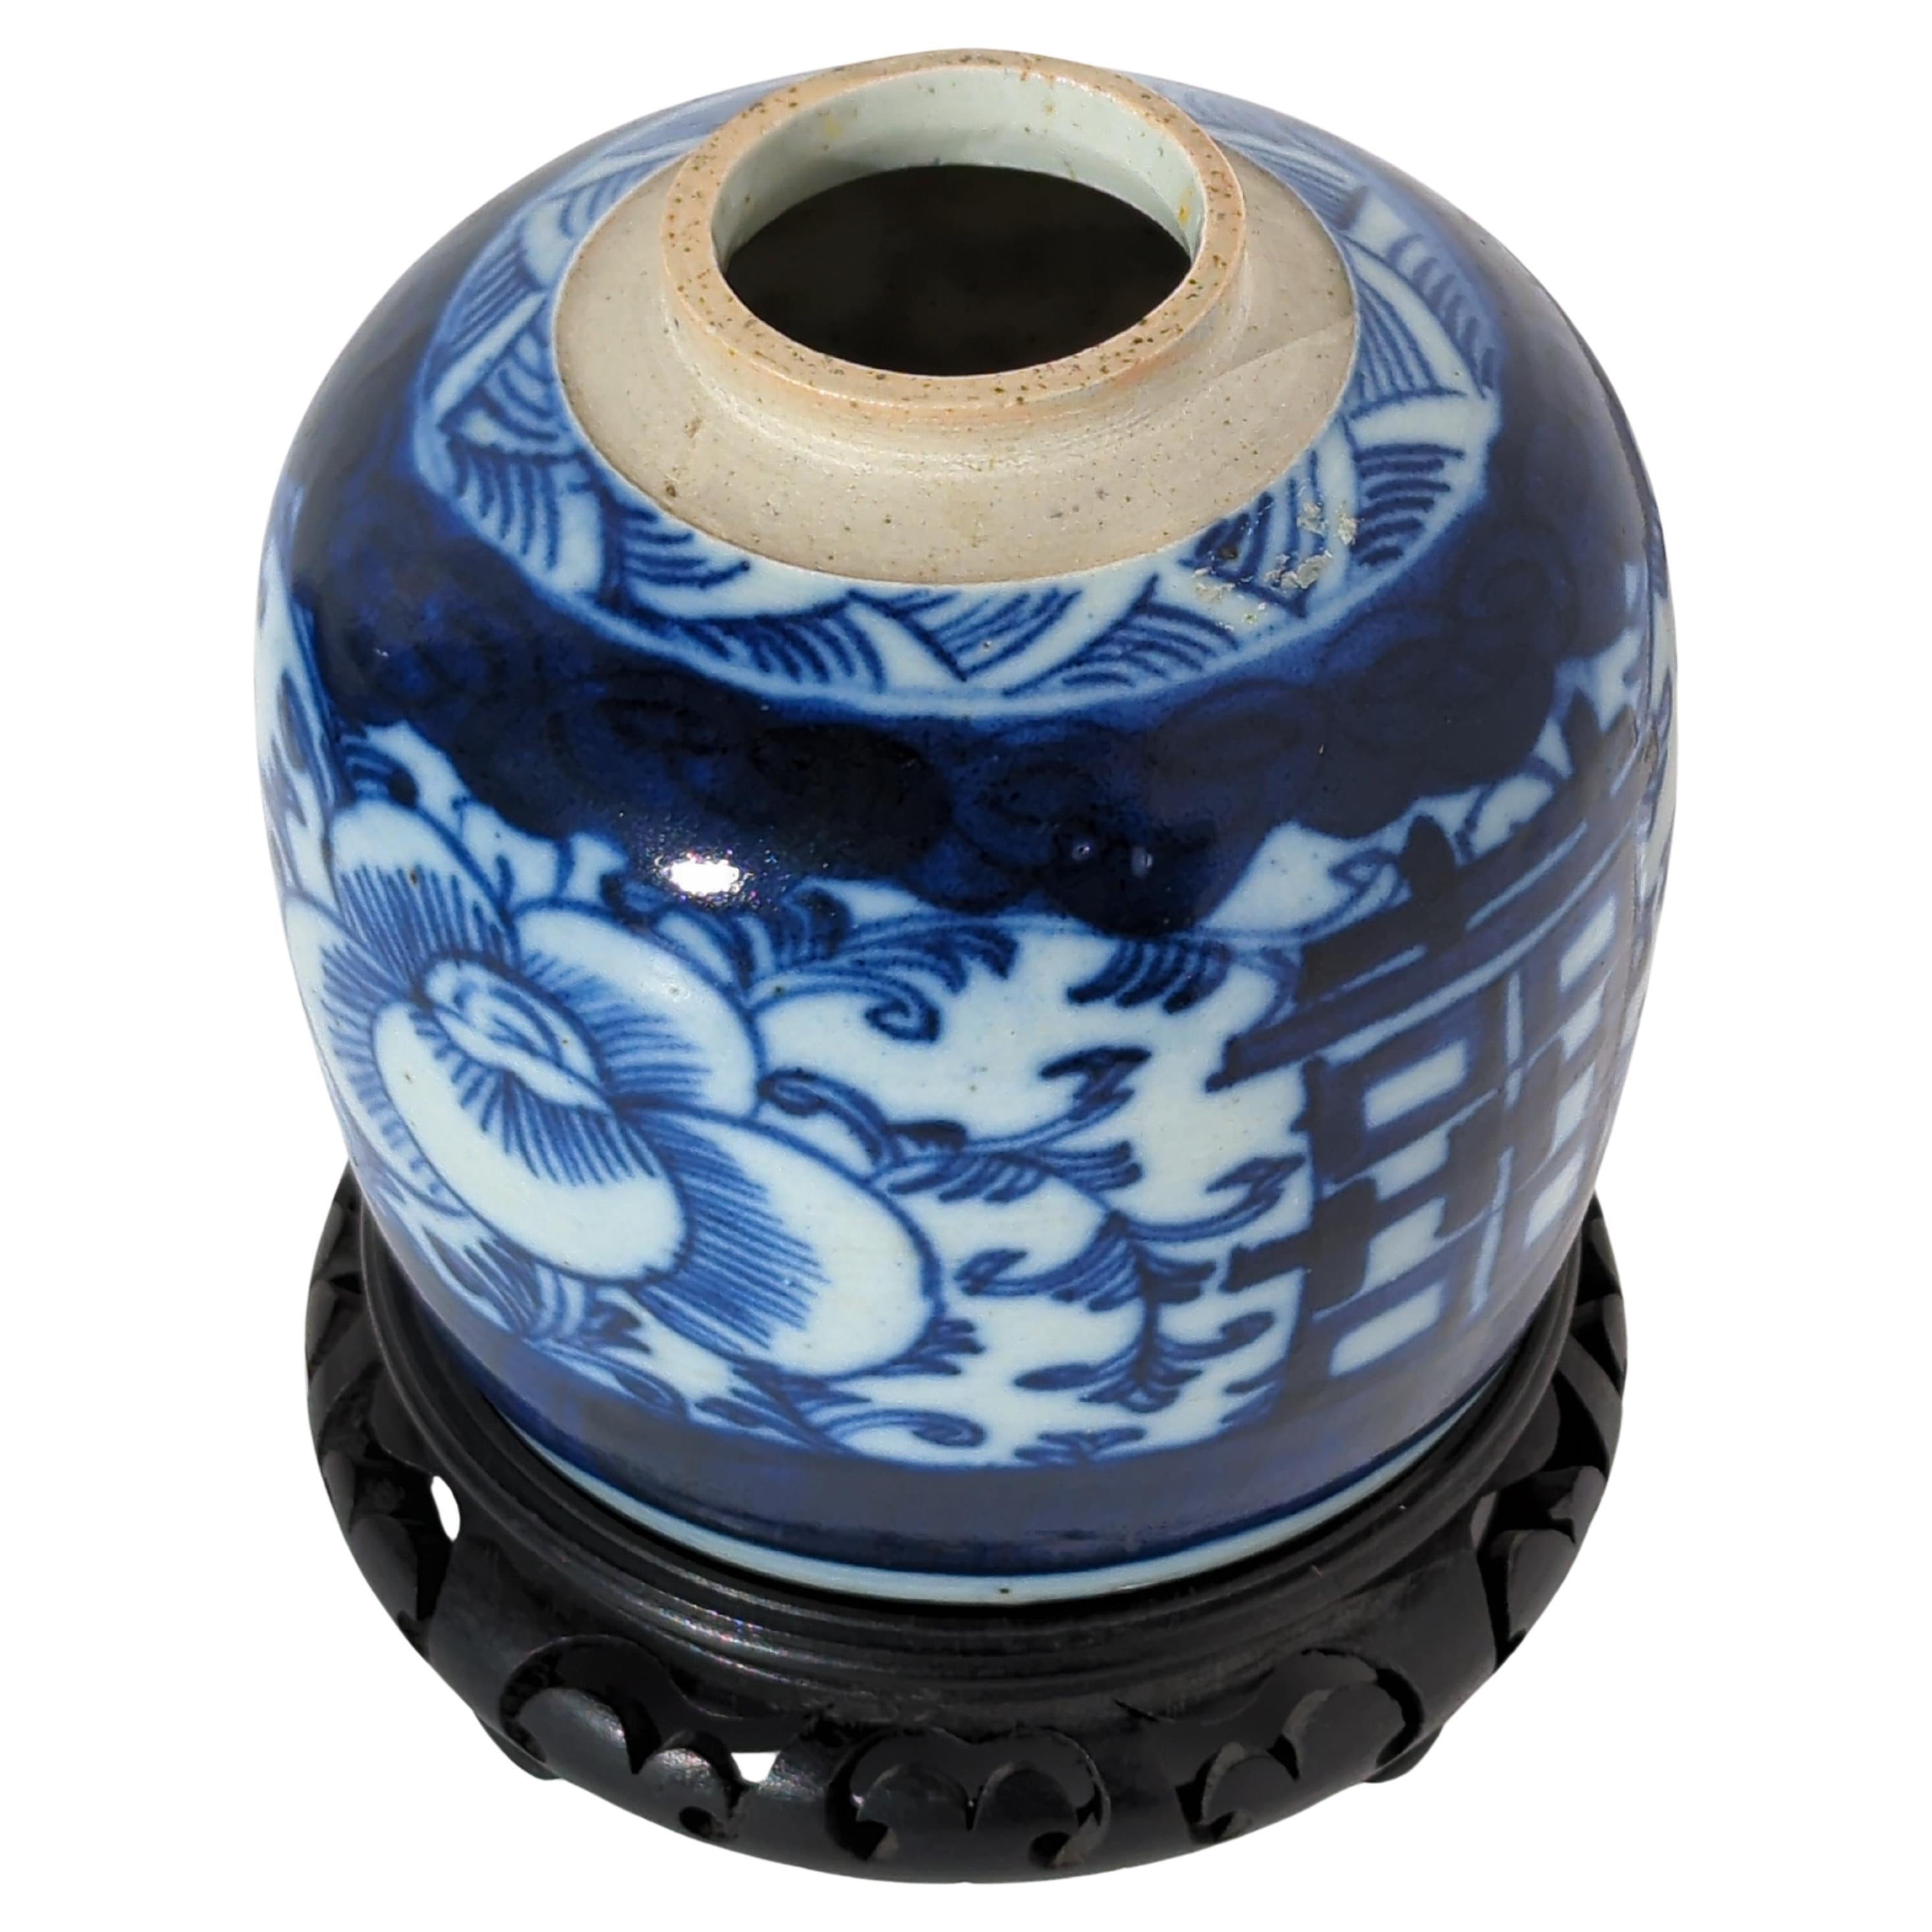 Antique Chinese Blue&White Porcelain Double Happiness Ginger Jar Vase c.1900  For Sale 1